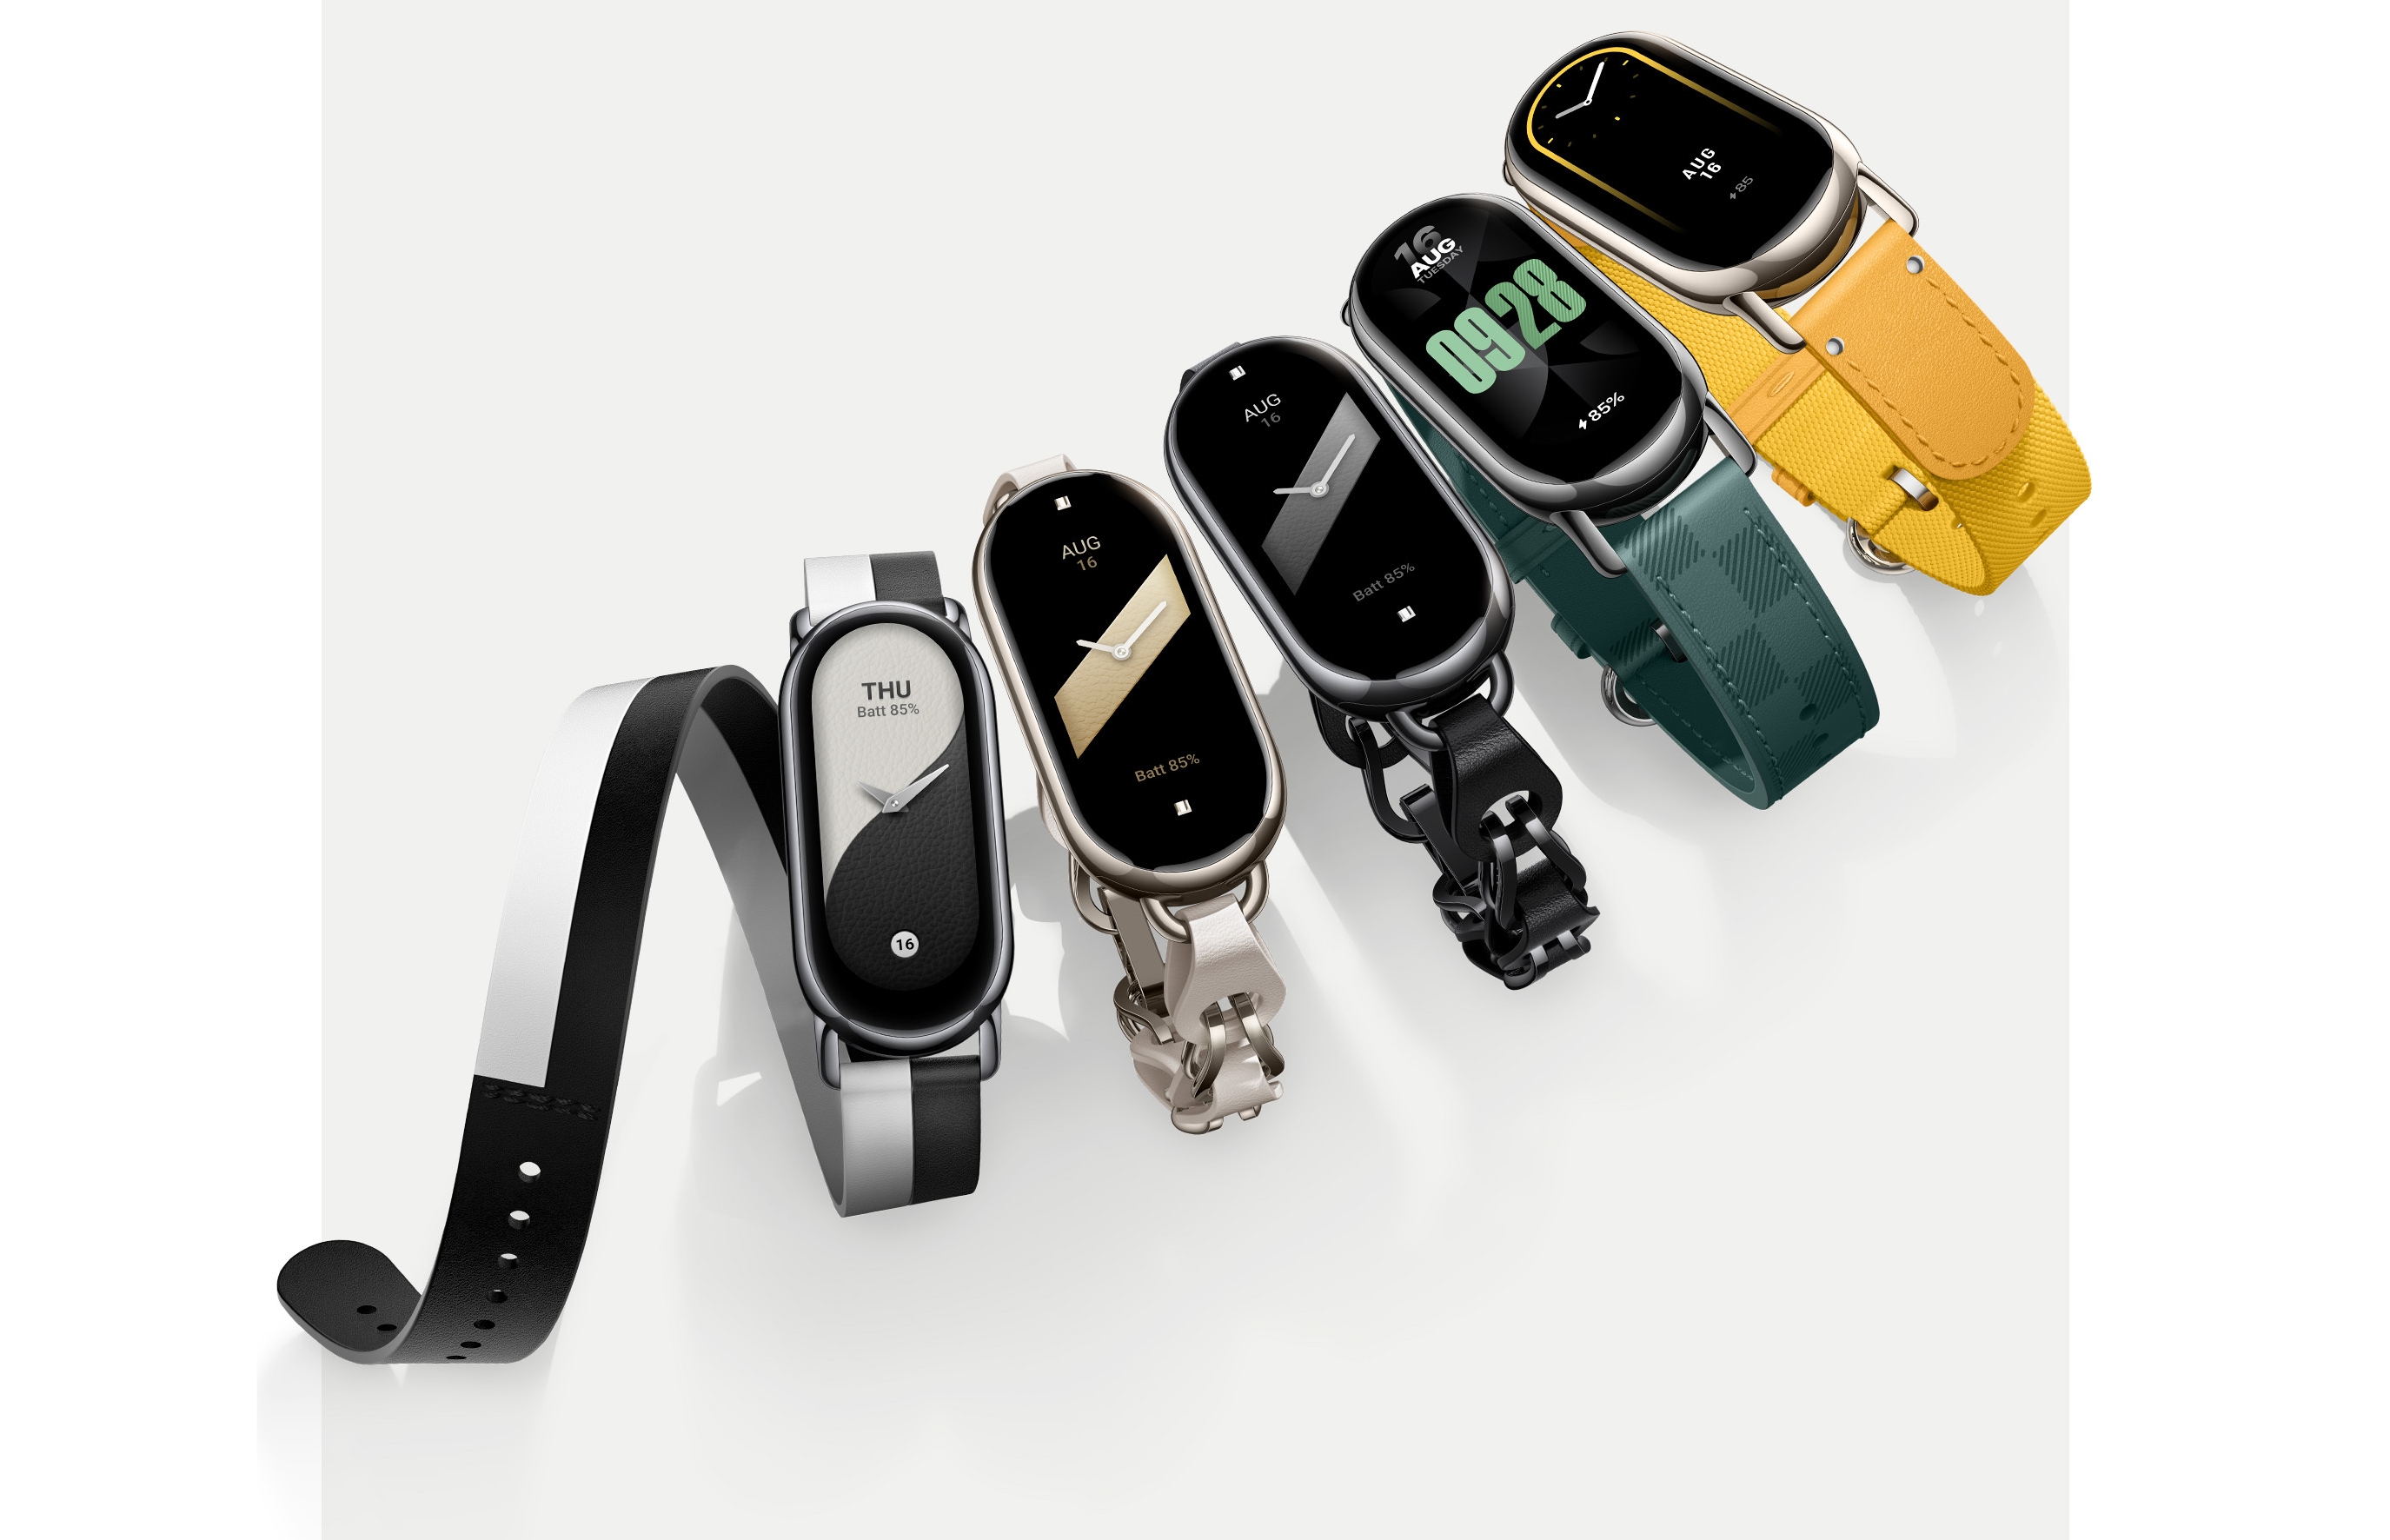 It's official: the Xiaomi Mi Band 8 smart bracelet will debut on 18 April